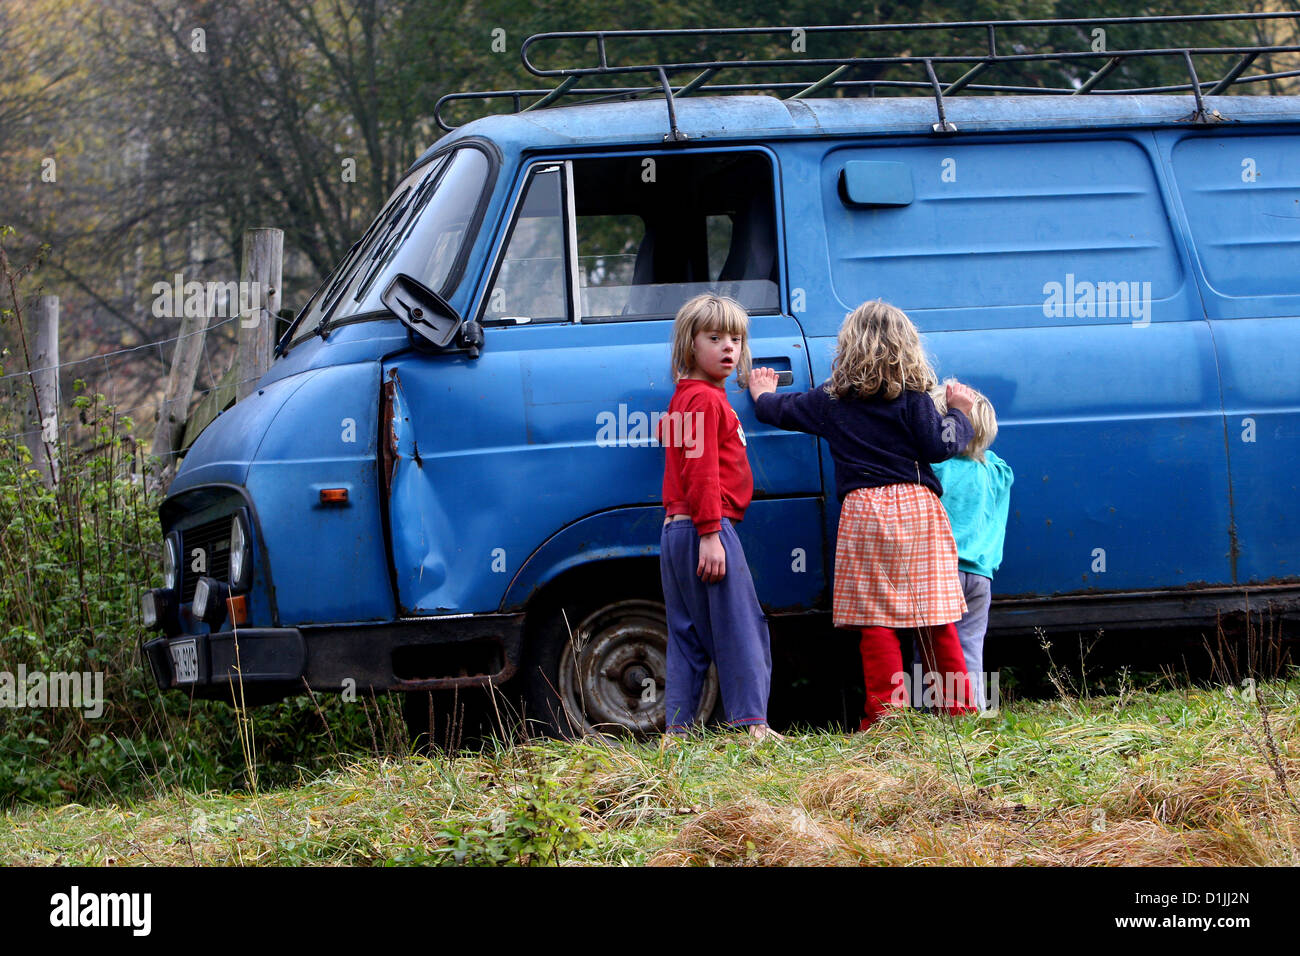 children at the old Skoda 1203 blue car Stock Photo